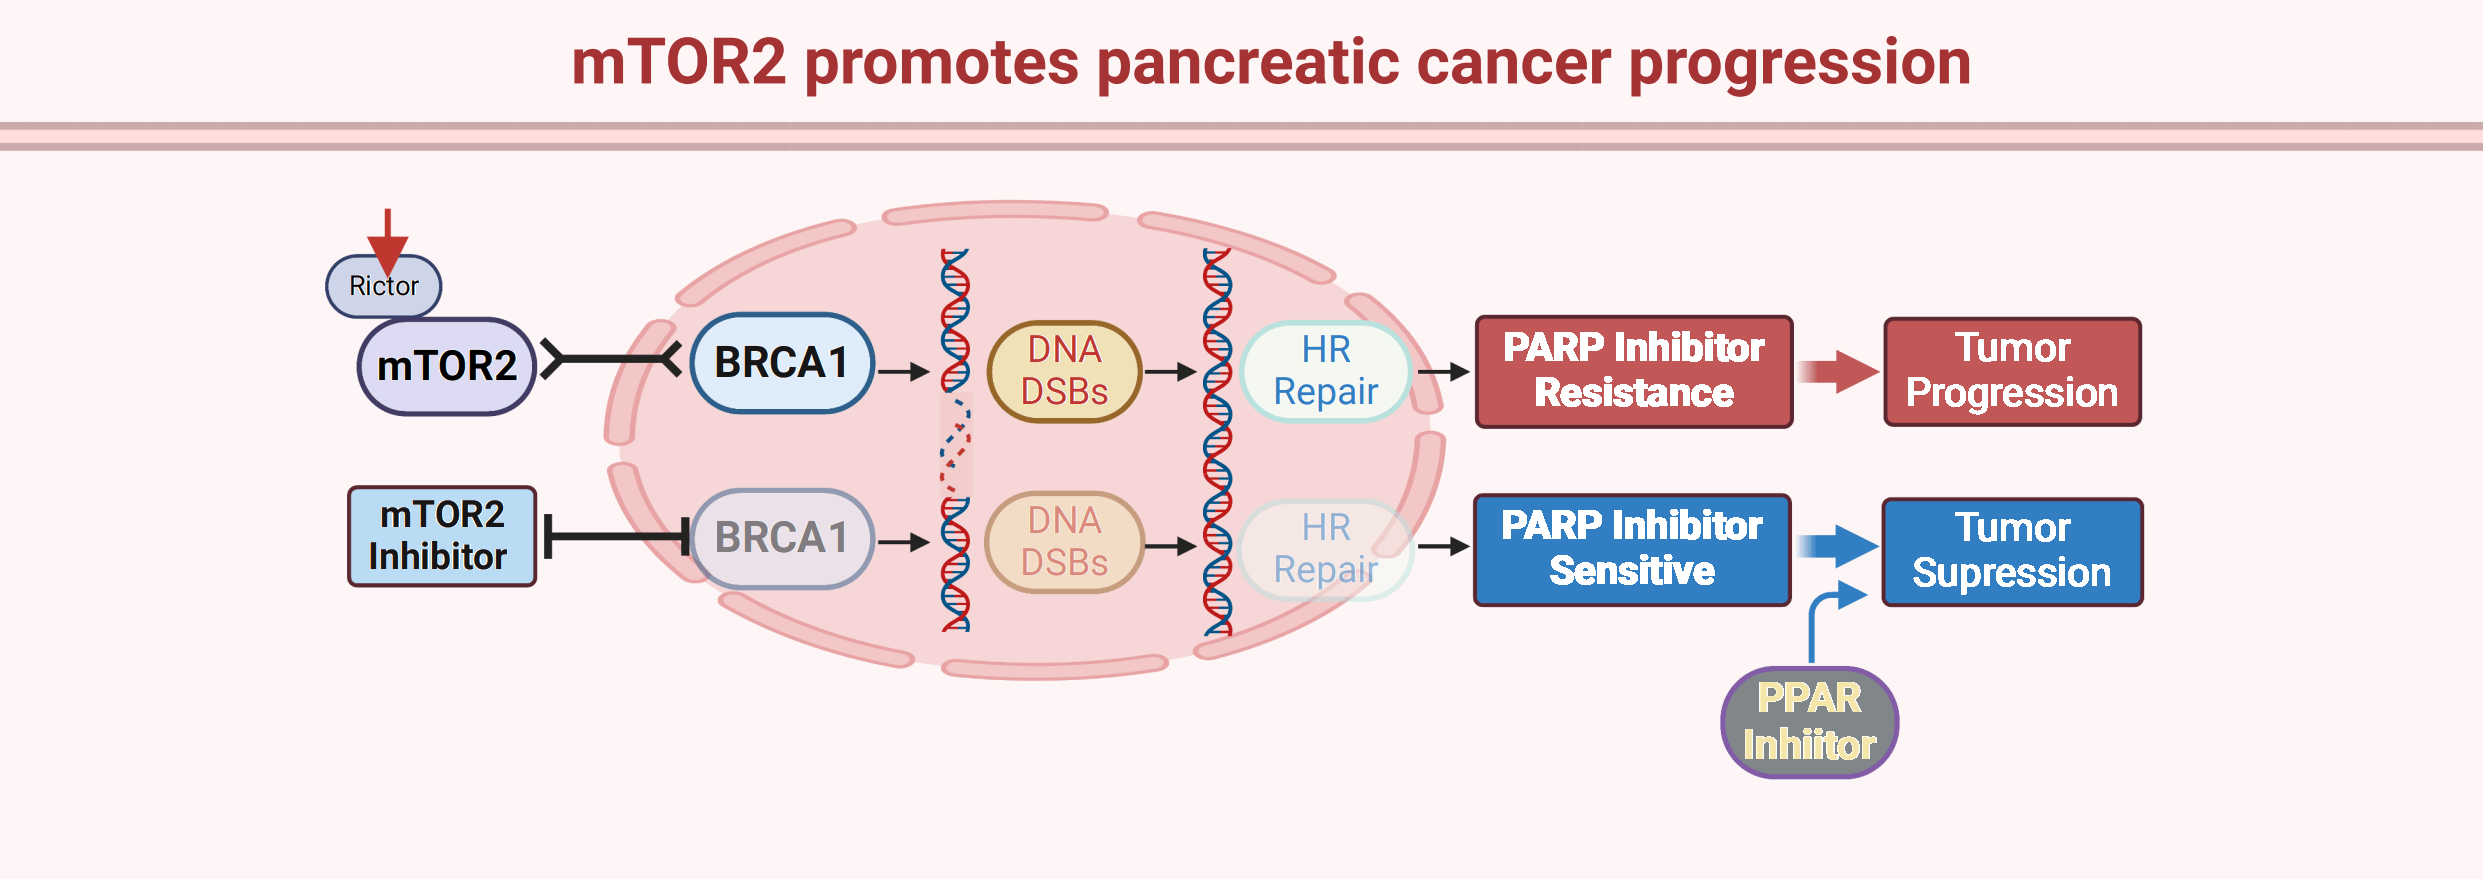 mTORC2 promotes pancreatic cancer progression and parp inhibitor resistance